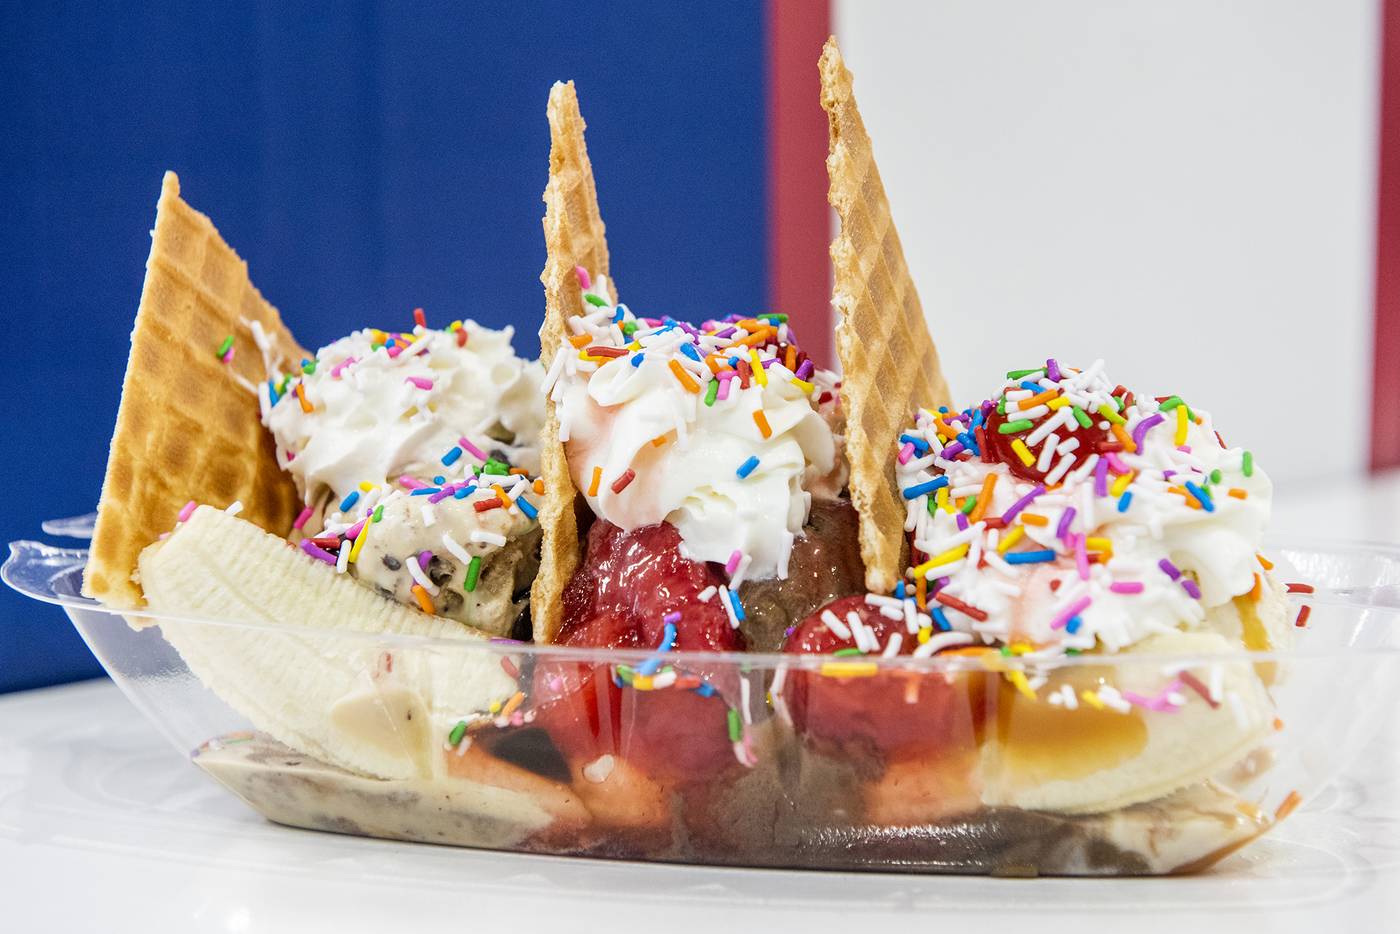 🍨 Order a Mega Sundae at Scoops Ahoy and We’ll Reveal Which “Stranger Things” Character You Are Stranger Things Baskin Robbins U.s.s. Butterscotch Sundae